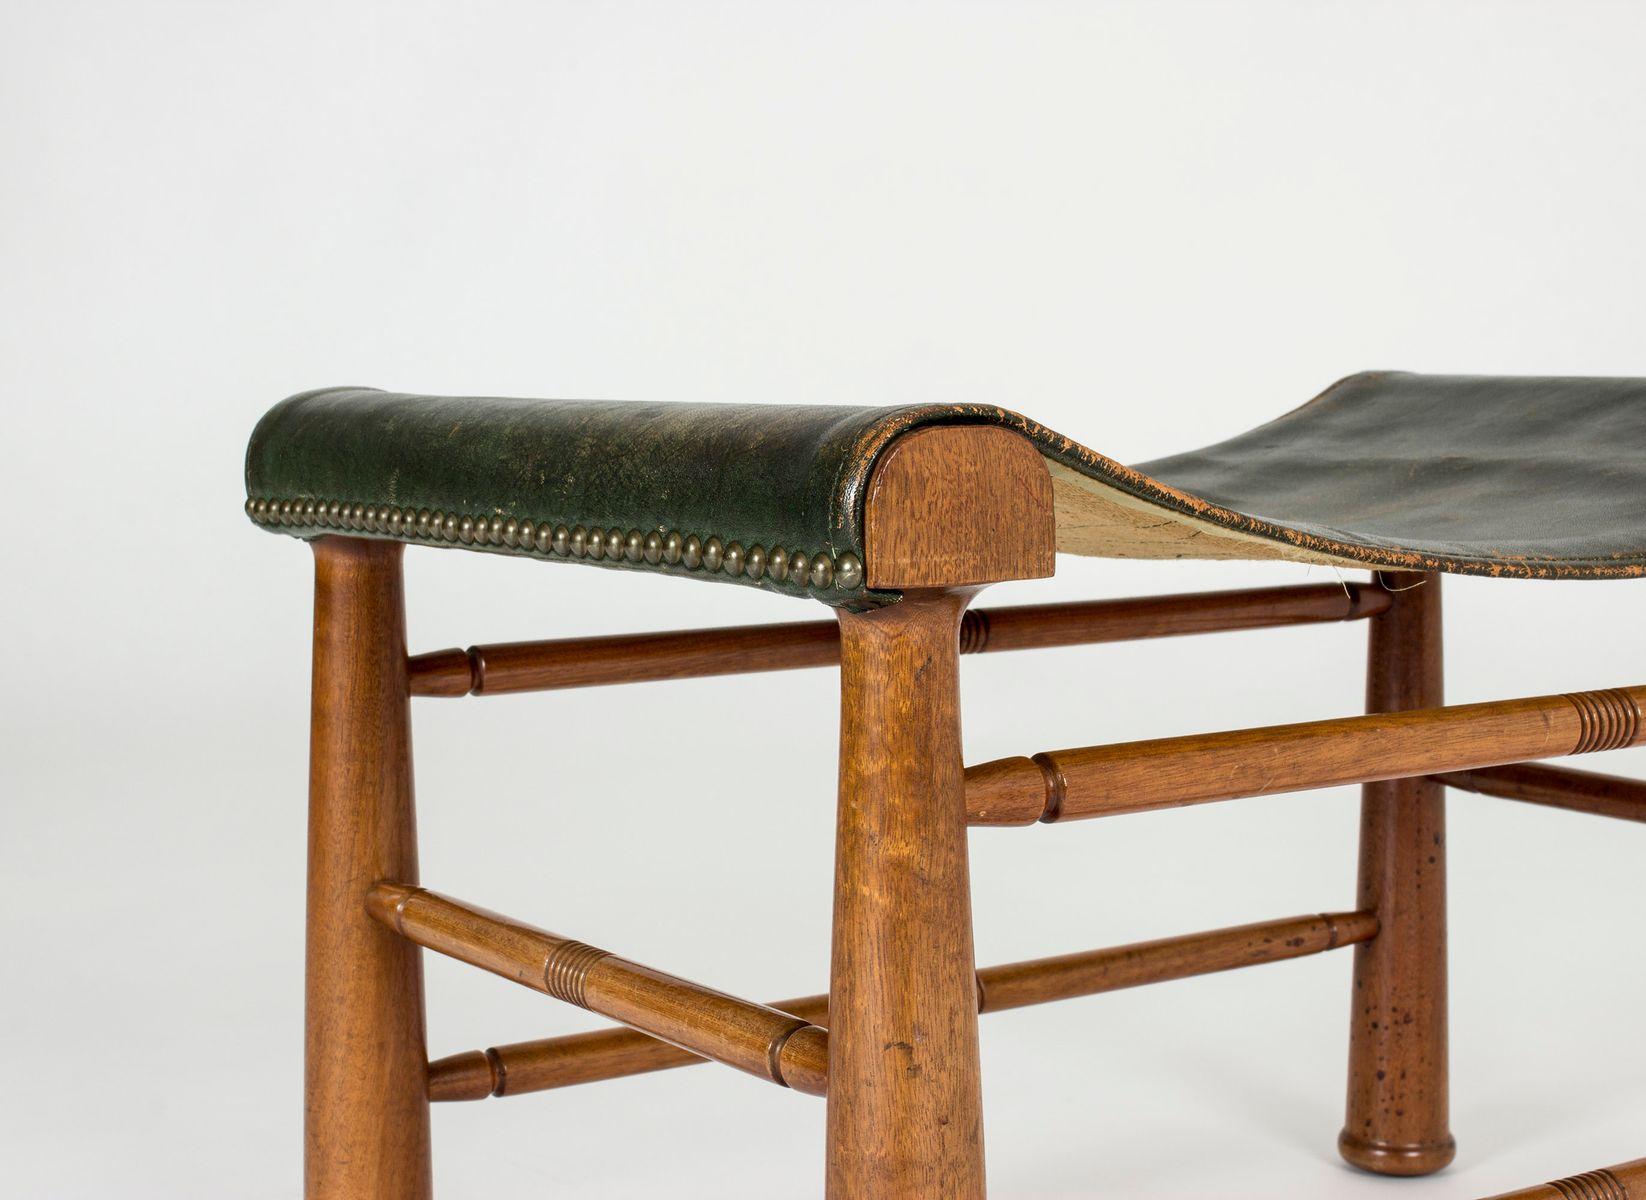 The stool Model 972 was created in 1941 by Swedish designer Josef Frank (1885-1967) for manufacture Svenskt Tenn, Stockholm. 
It is made of mahogany carved with linear decoration. The sling dark green leather seat is enhanced with brass nails to